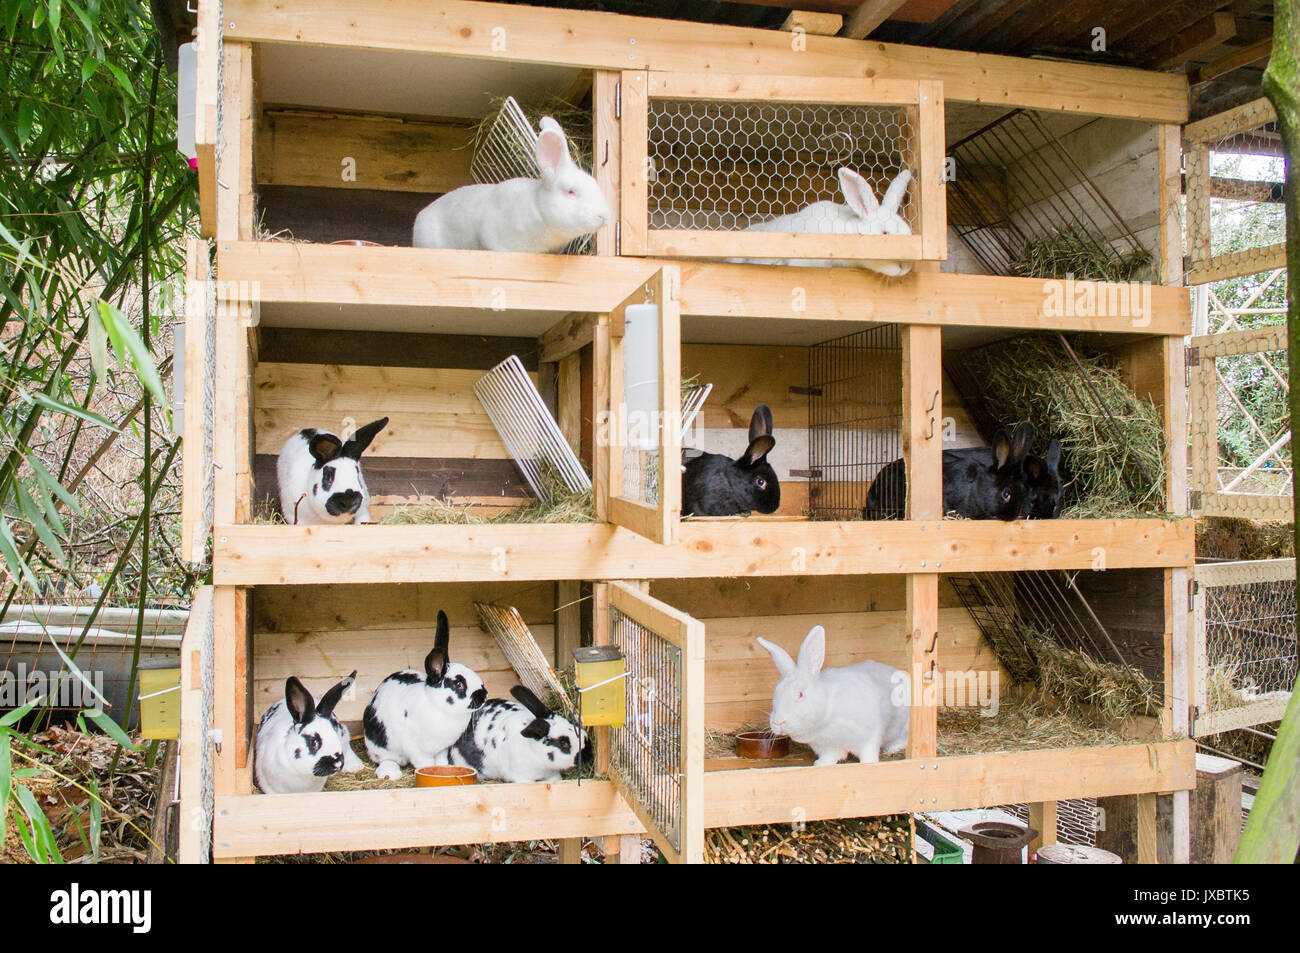 Straw Bedding For Rabbits: The Key Facts